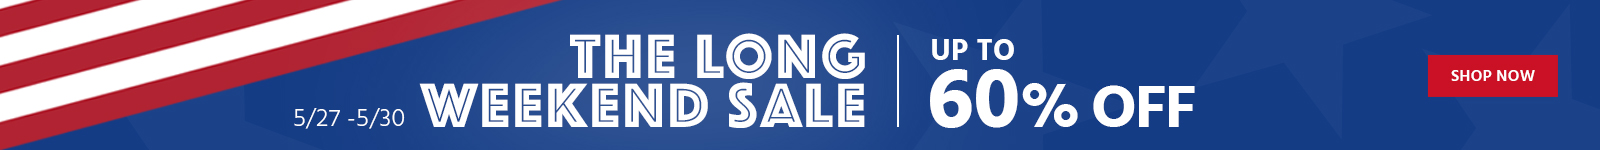 The Long Weekend Sale Up to 60% off 5/27 -5/30 Shop Now